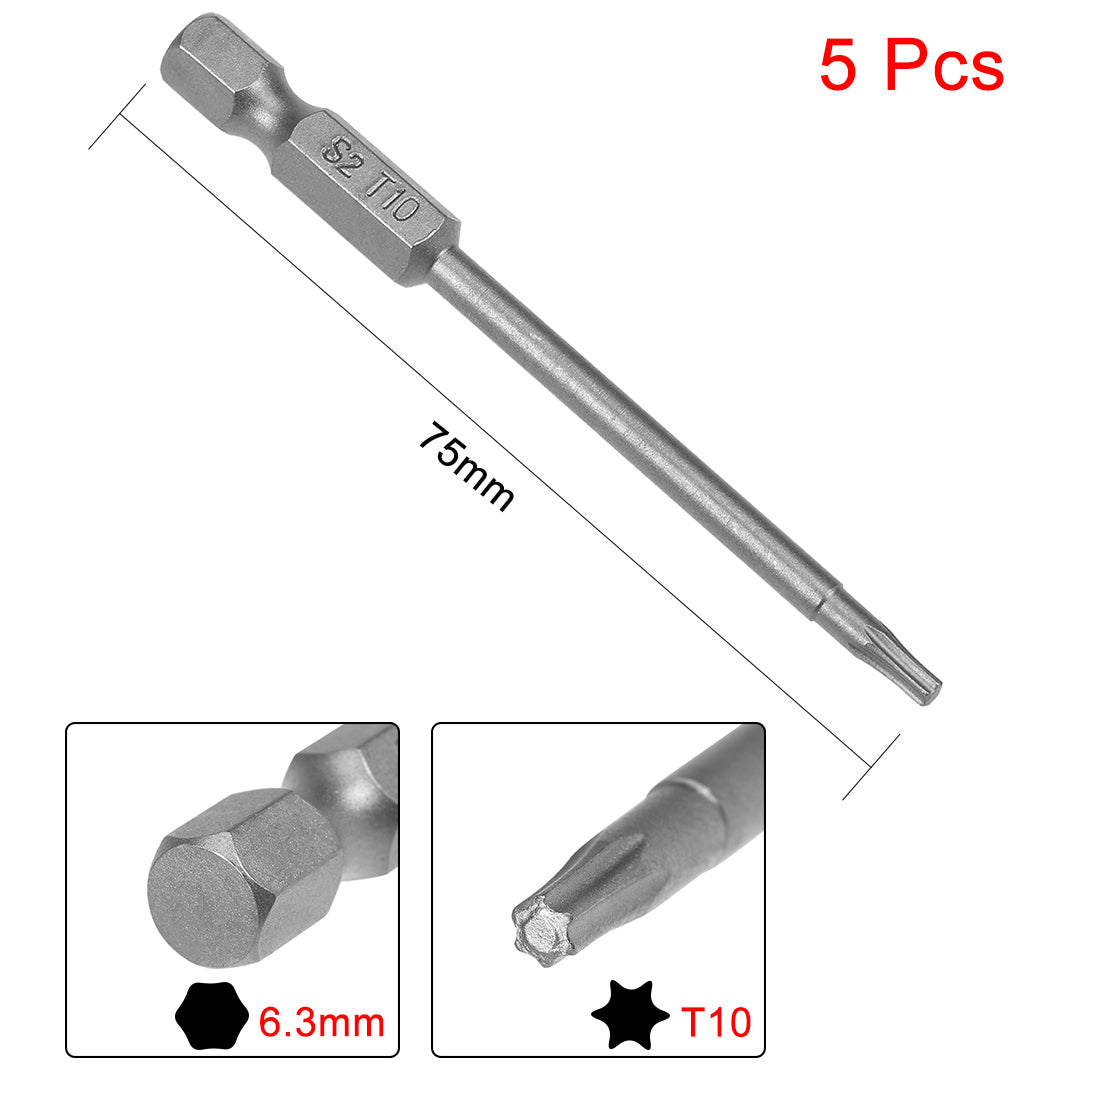 Uxcell Uxcell 5pcs 100mm Long 1/4" Hex Shank T8 Magnetic Torx Head Screwdriver Bits S2 High Alloy Steel